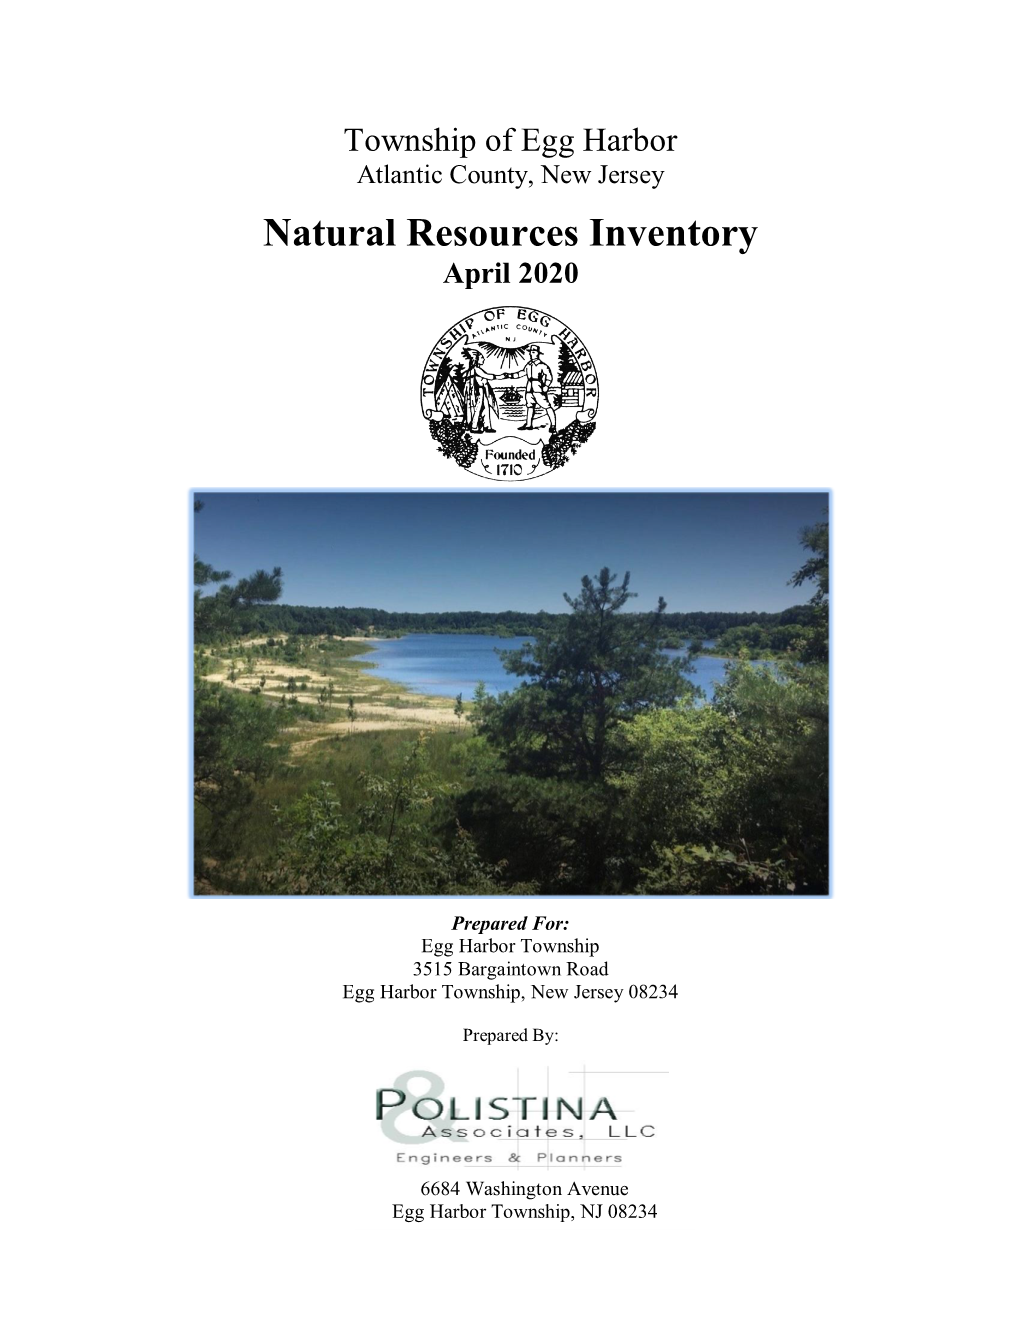 Natural Resource Inventory 2020